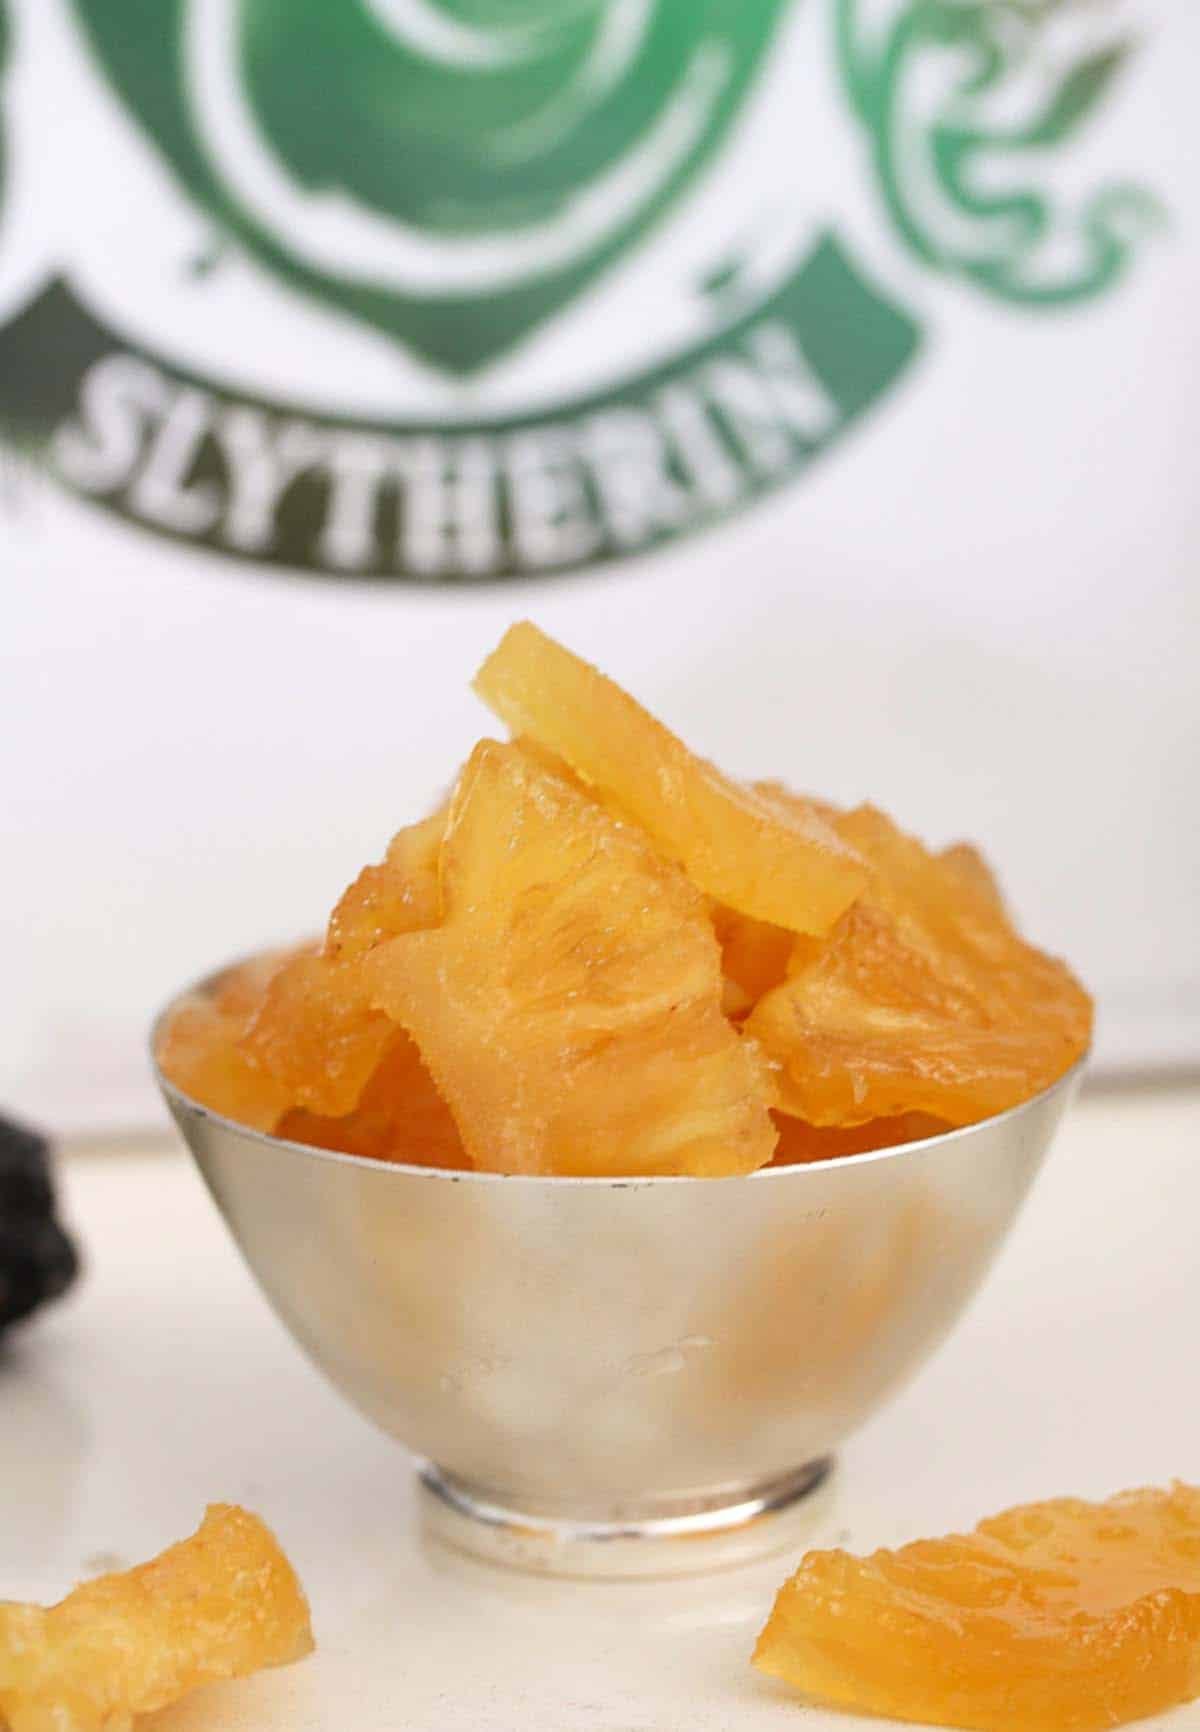 slughorn's crystallized pineapple pieces in a small bowl with slytherin logo behind.